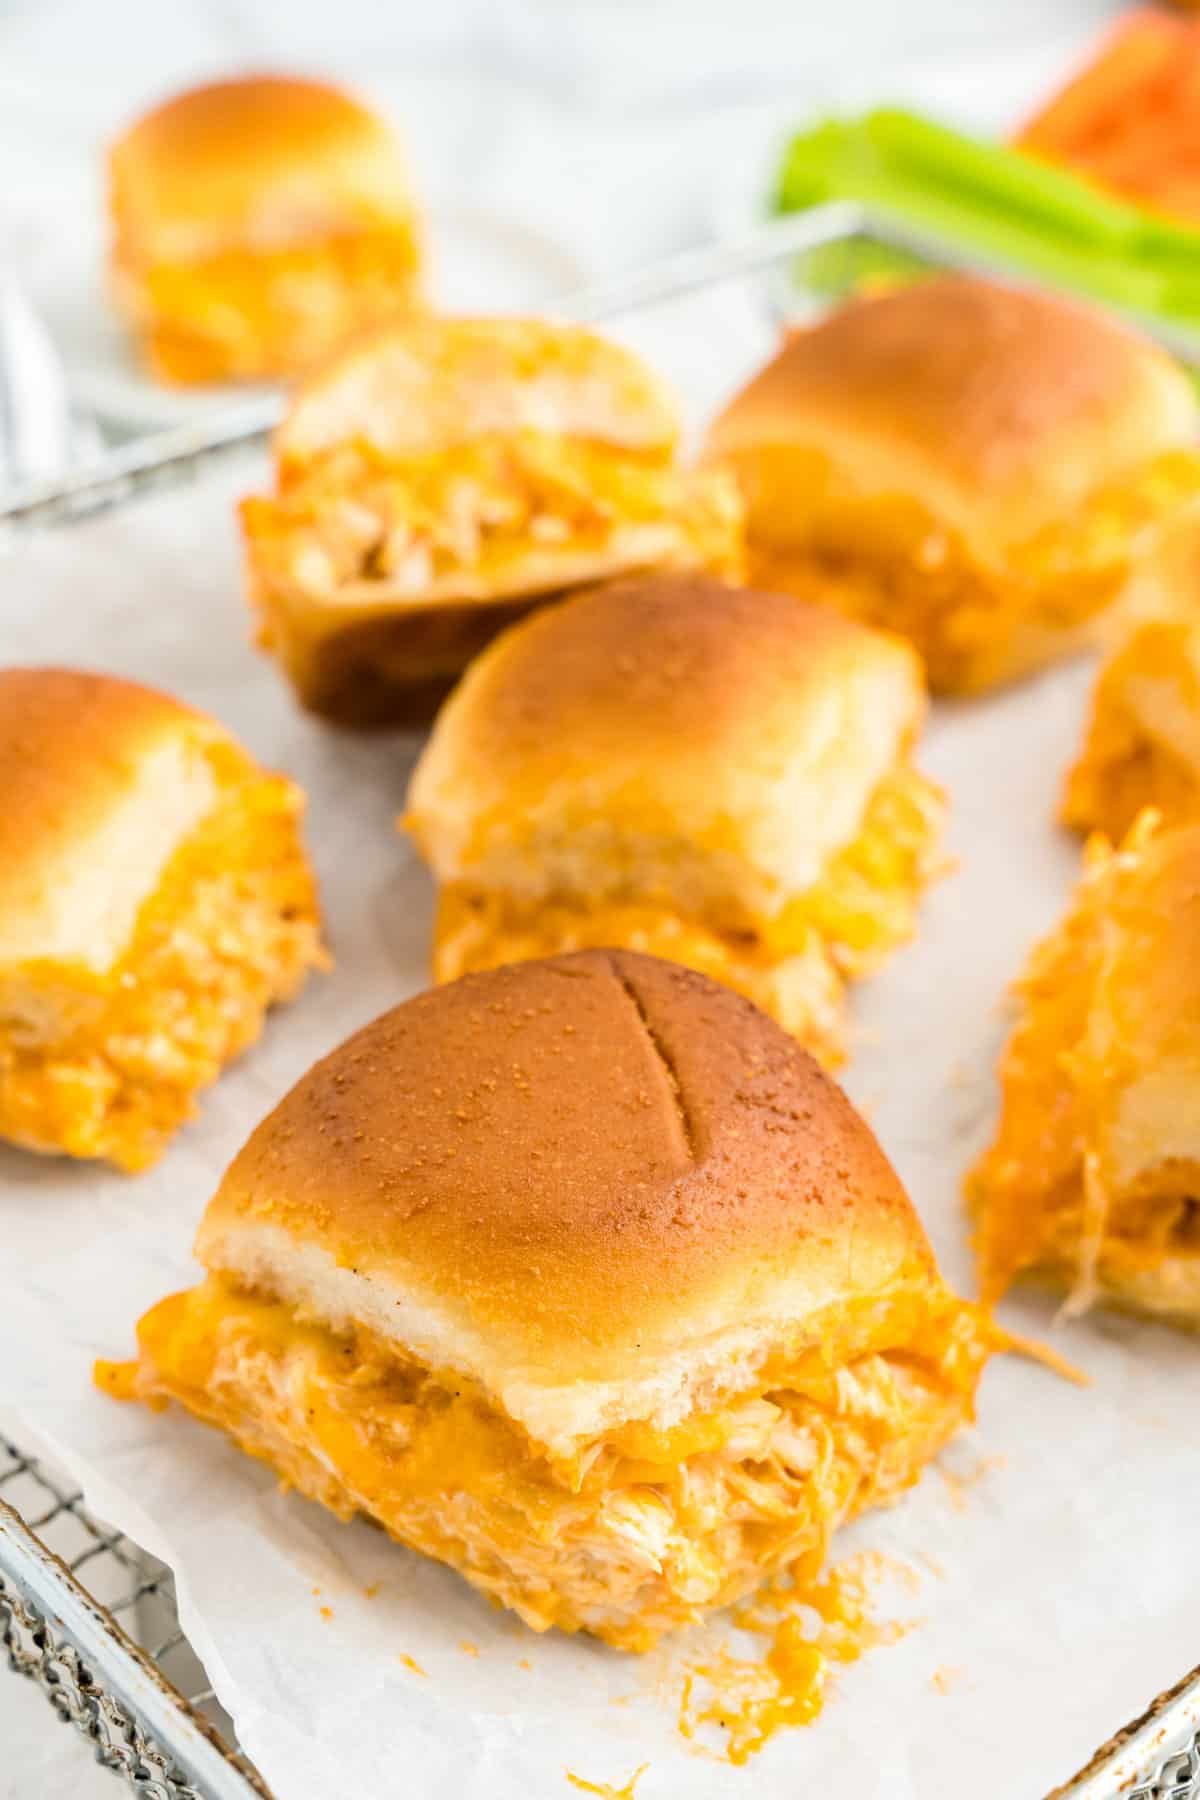 Buffalo Chicken Sliders scattered on serving plate